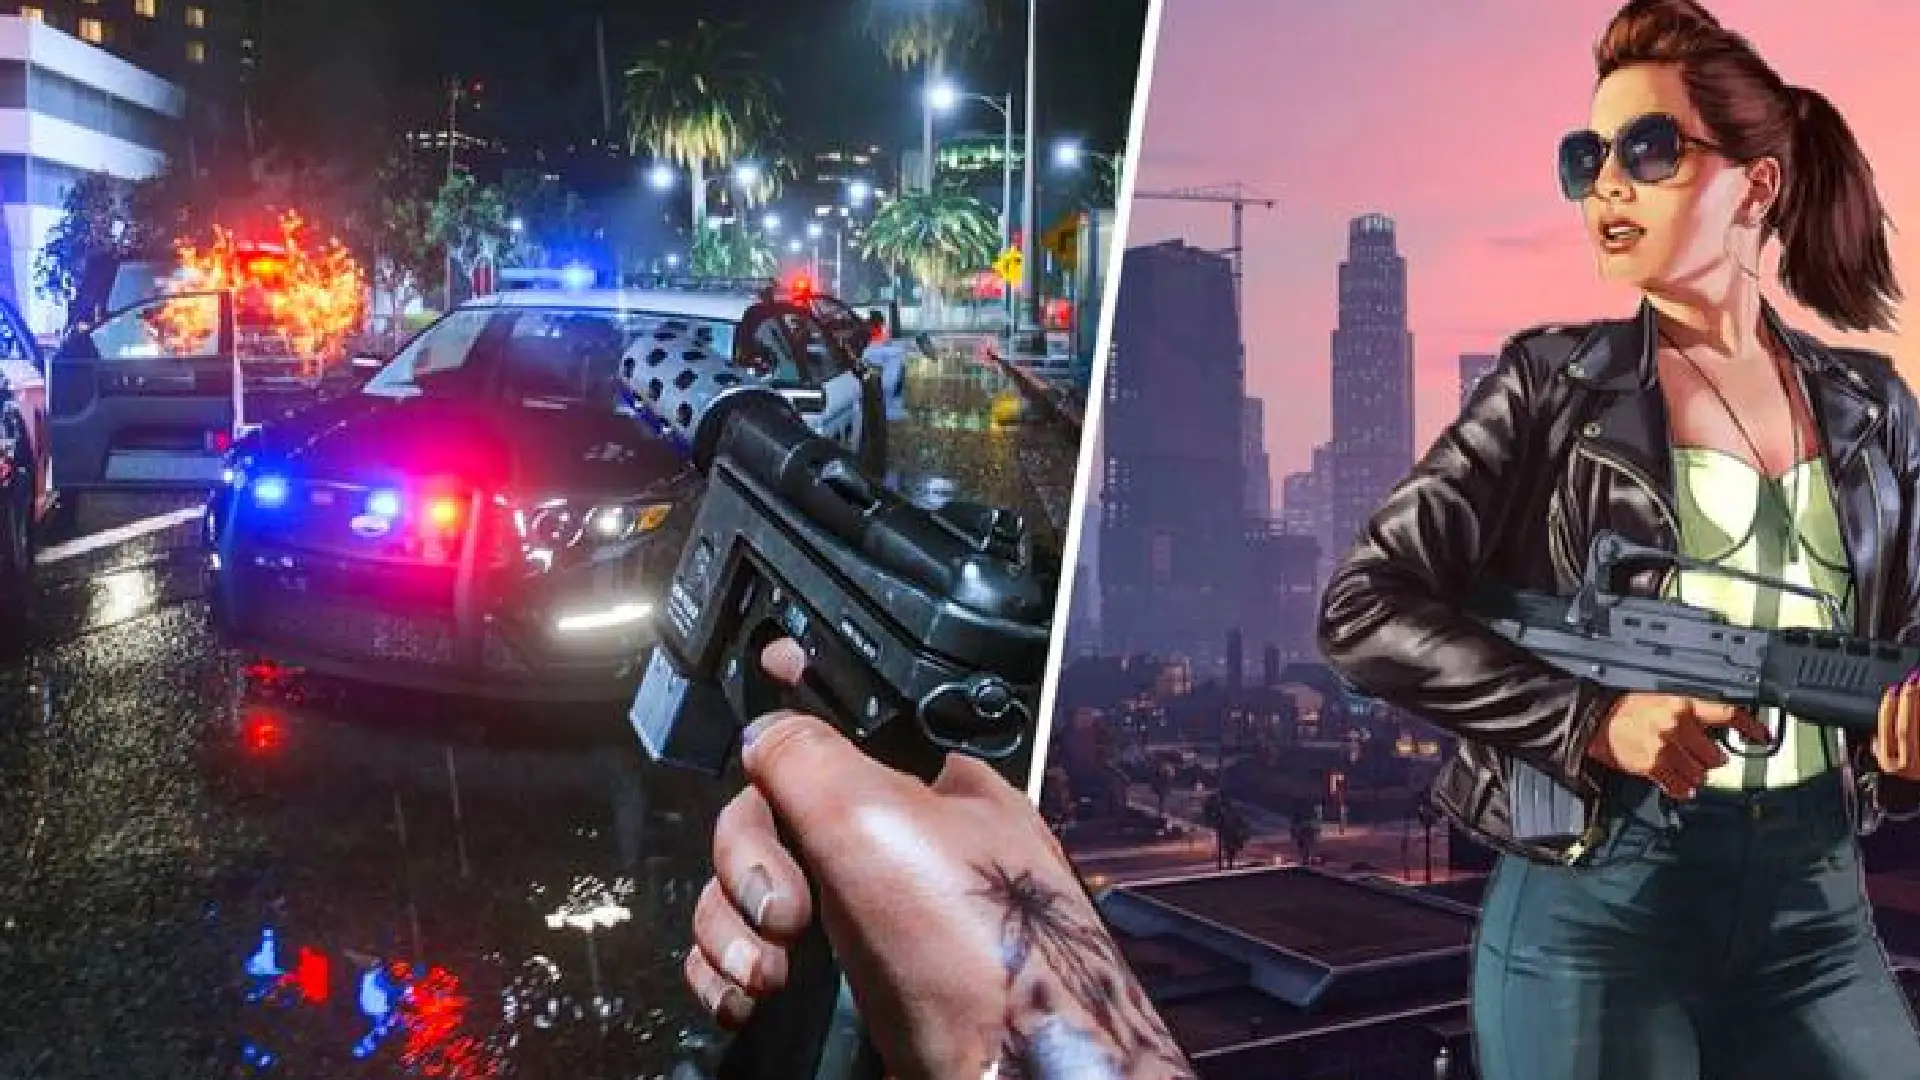 Grand Theft Auto VI video leak: Crucial gameplay details revealed